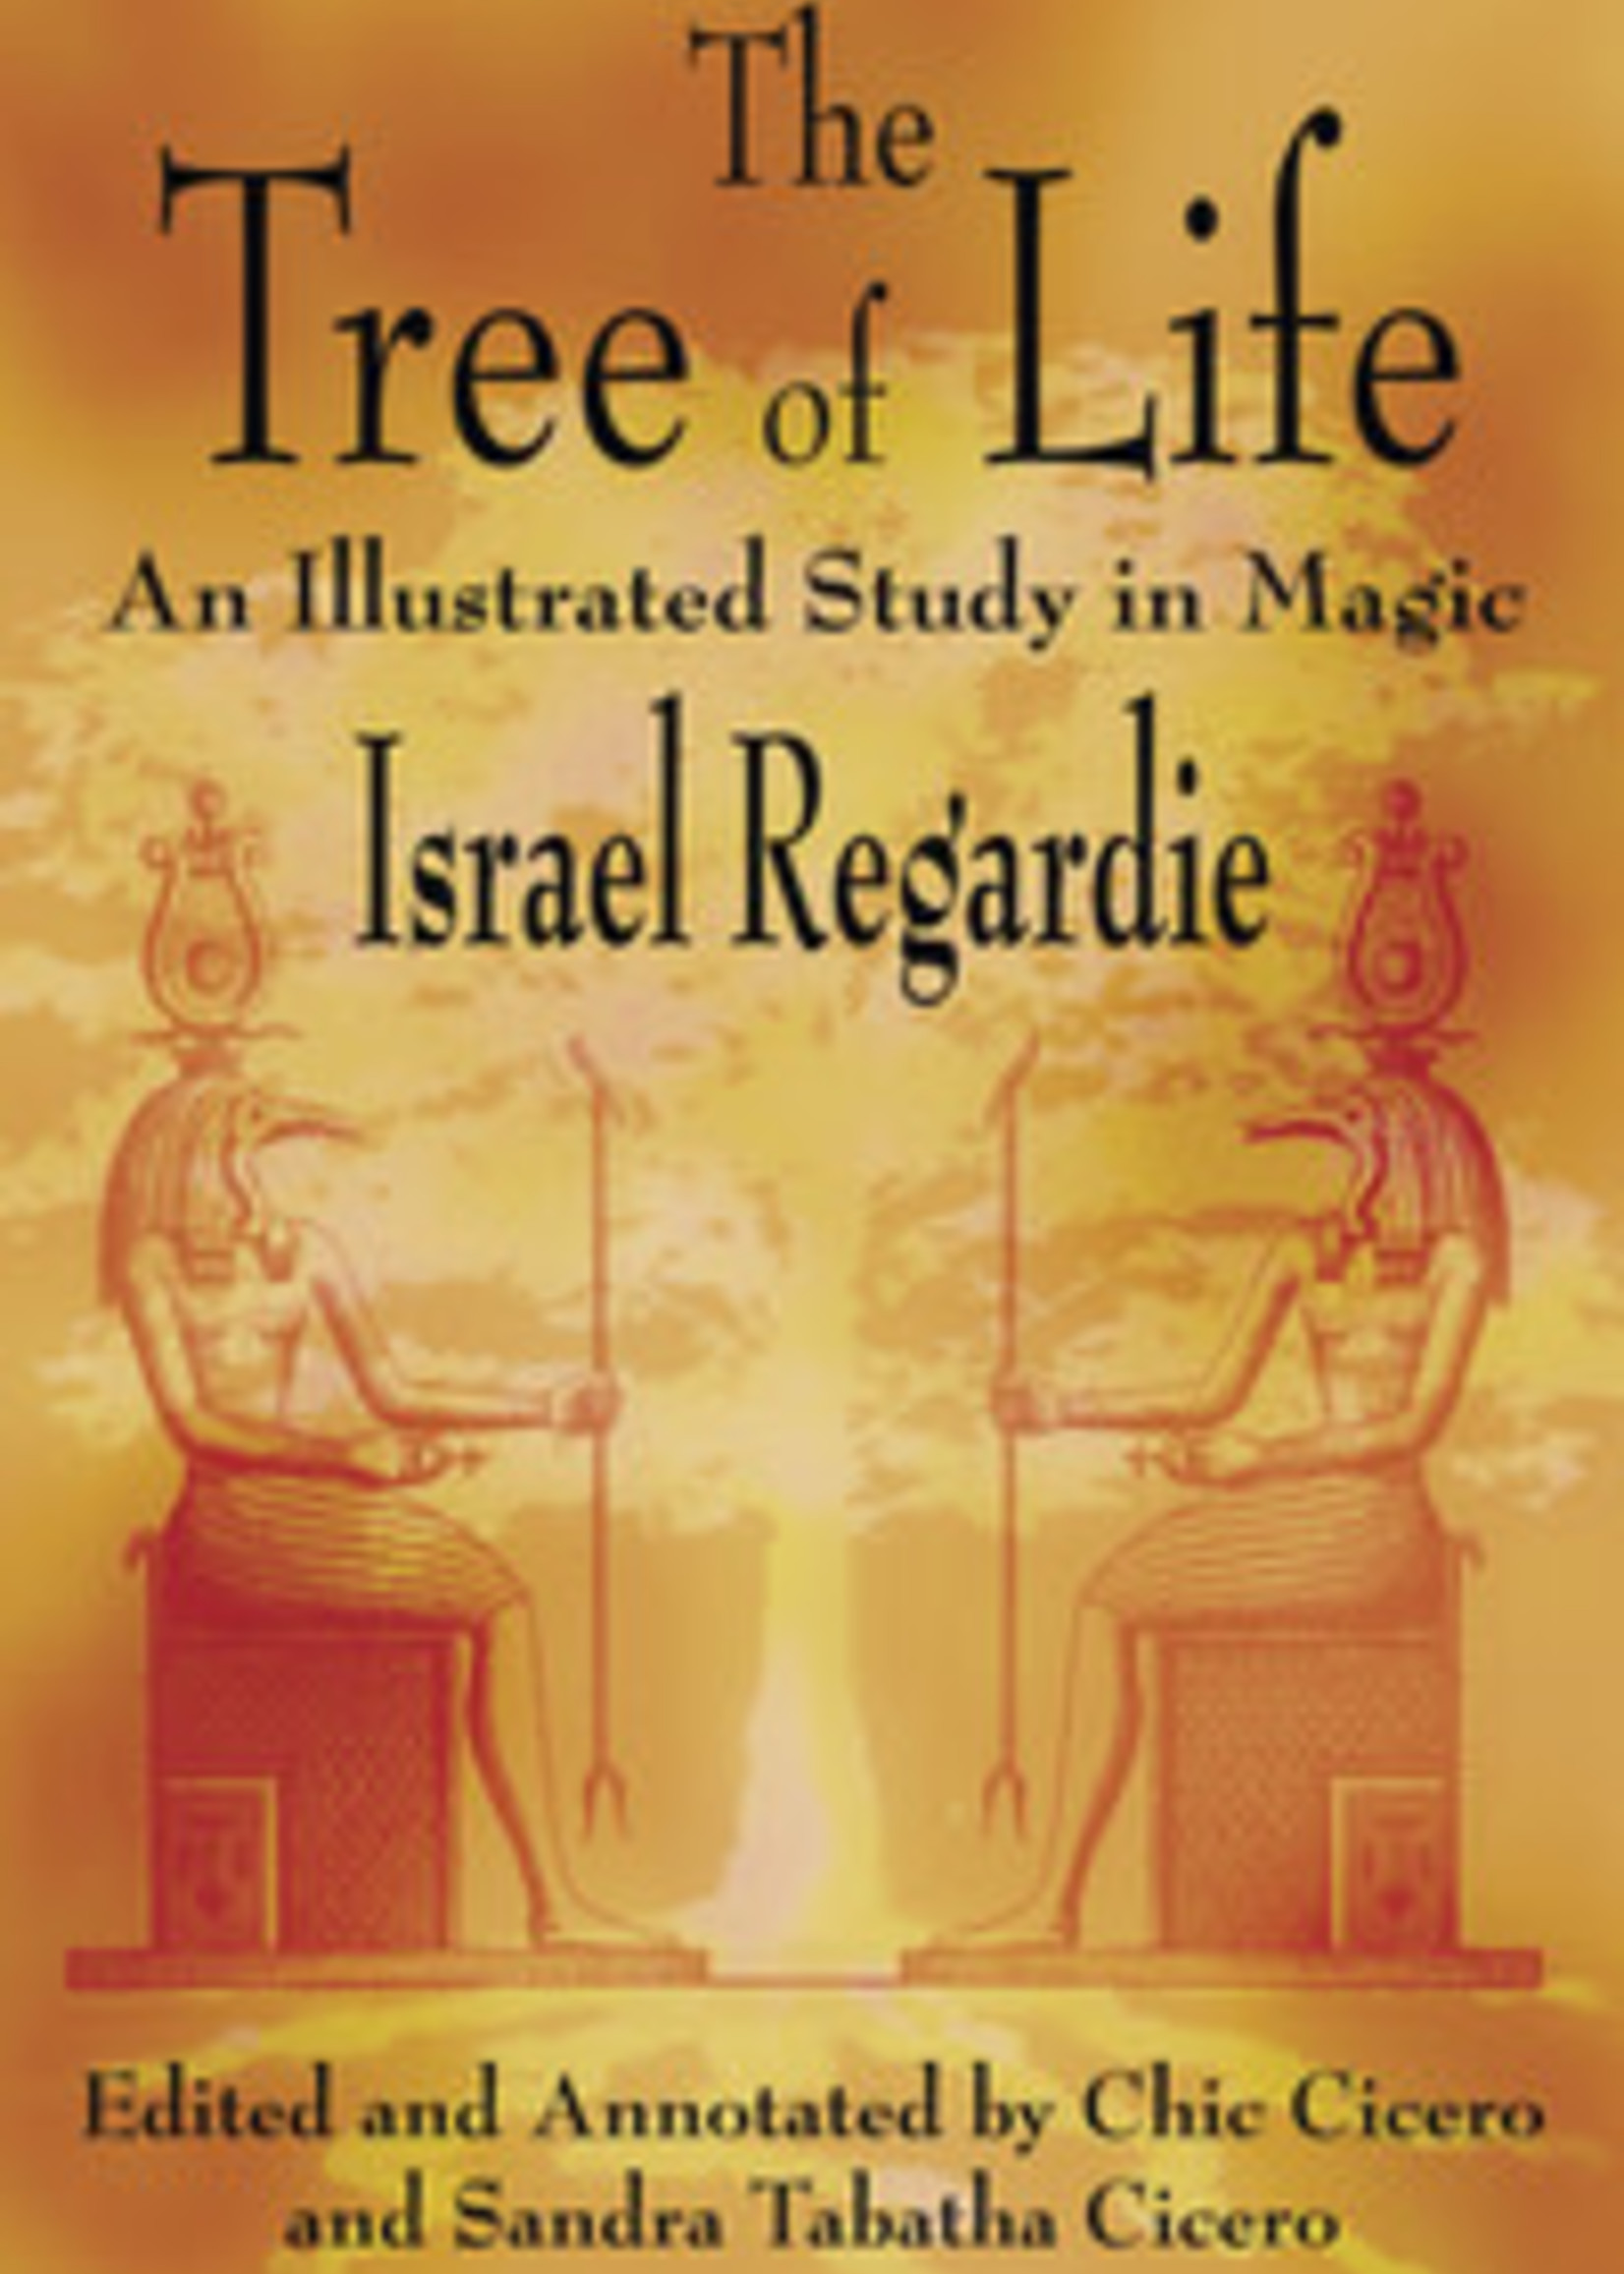 The Tree of Life- An Illustrated Study in Magic